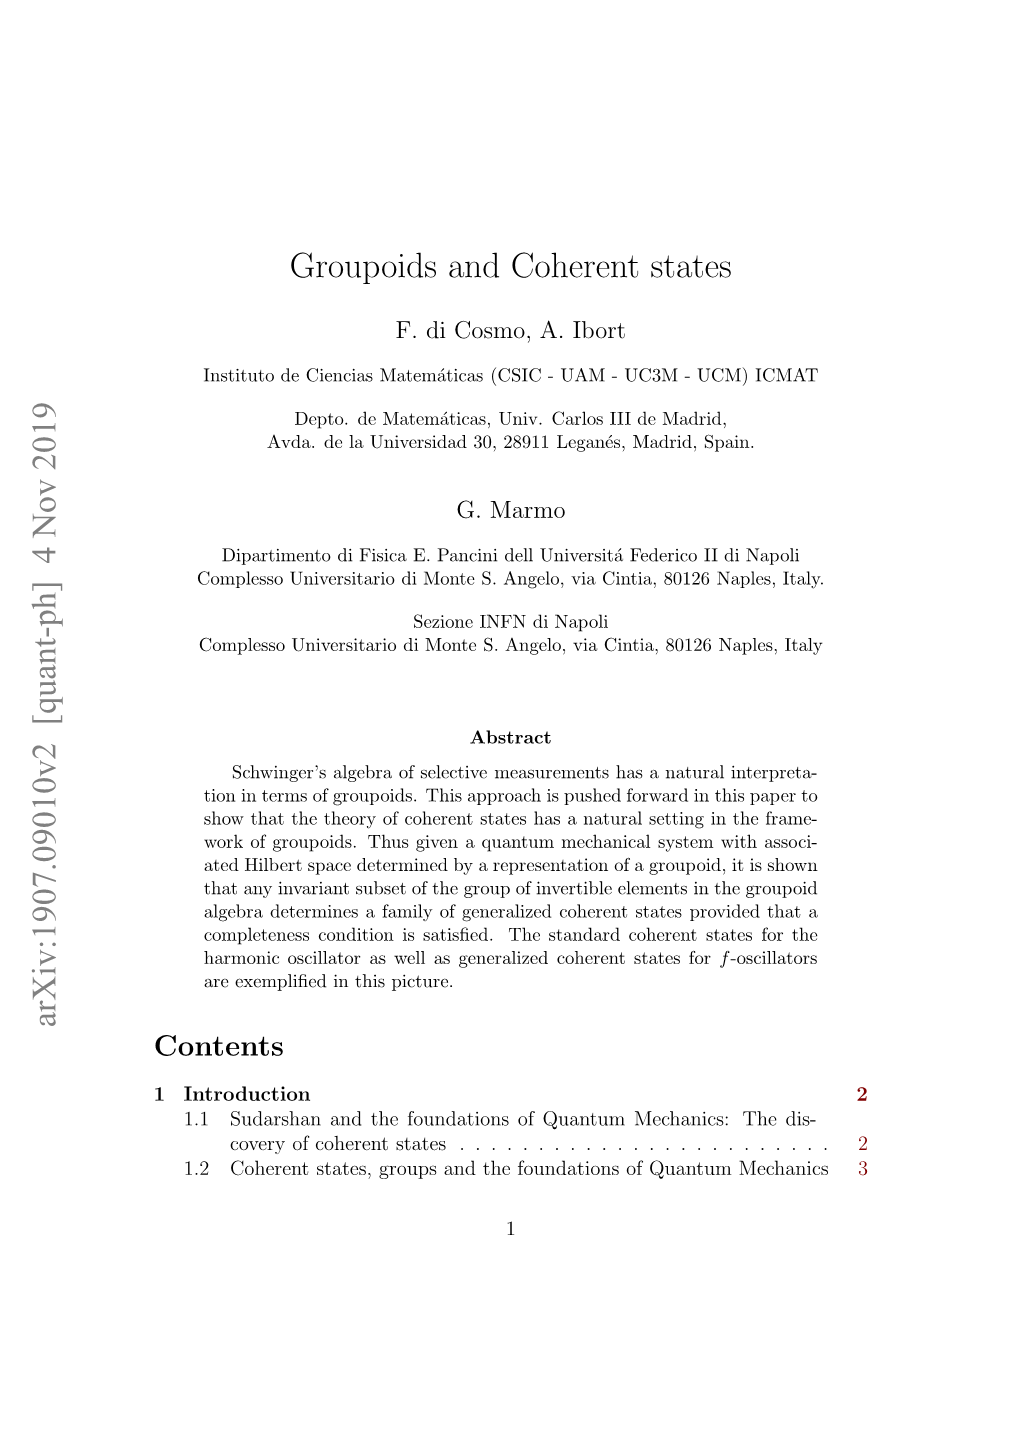 4 Nov 2019 Groupoids and Coherent States